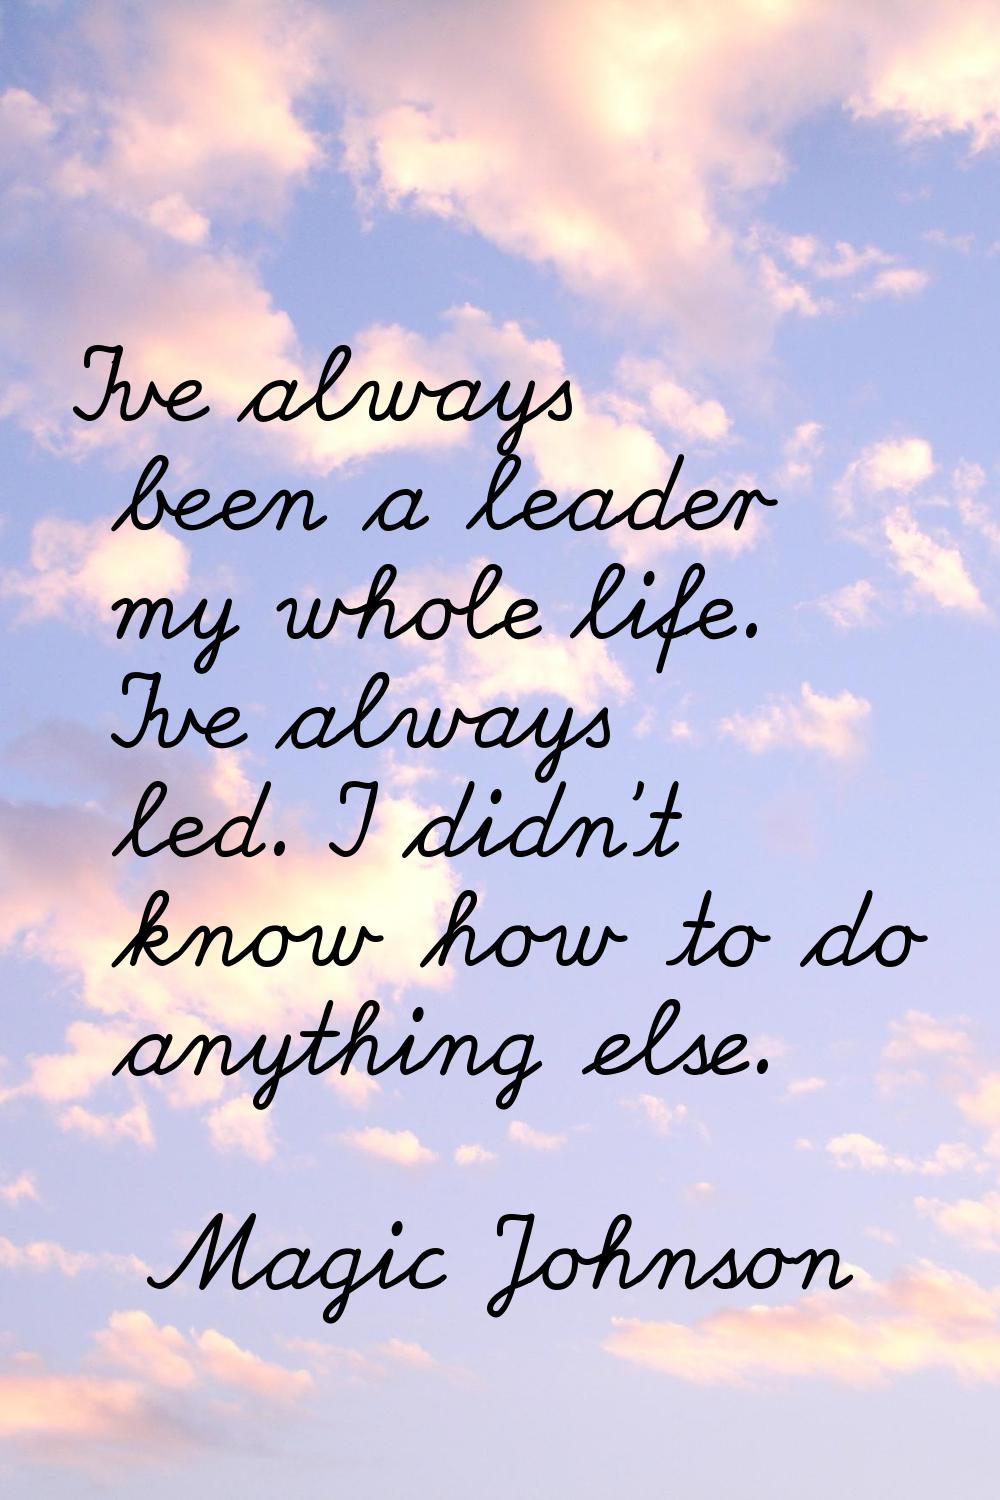 I've always been a leader my whole life. I've always led. I didn't know how to do anything else.